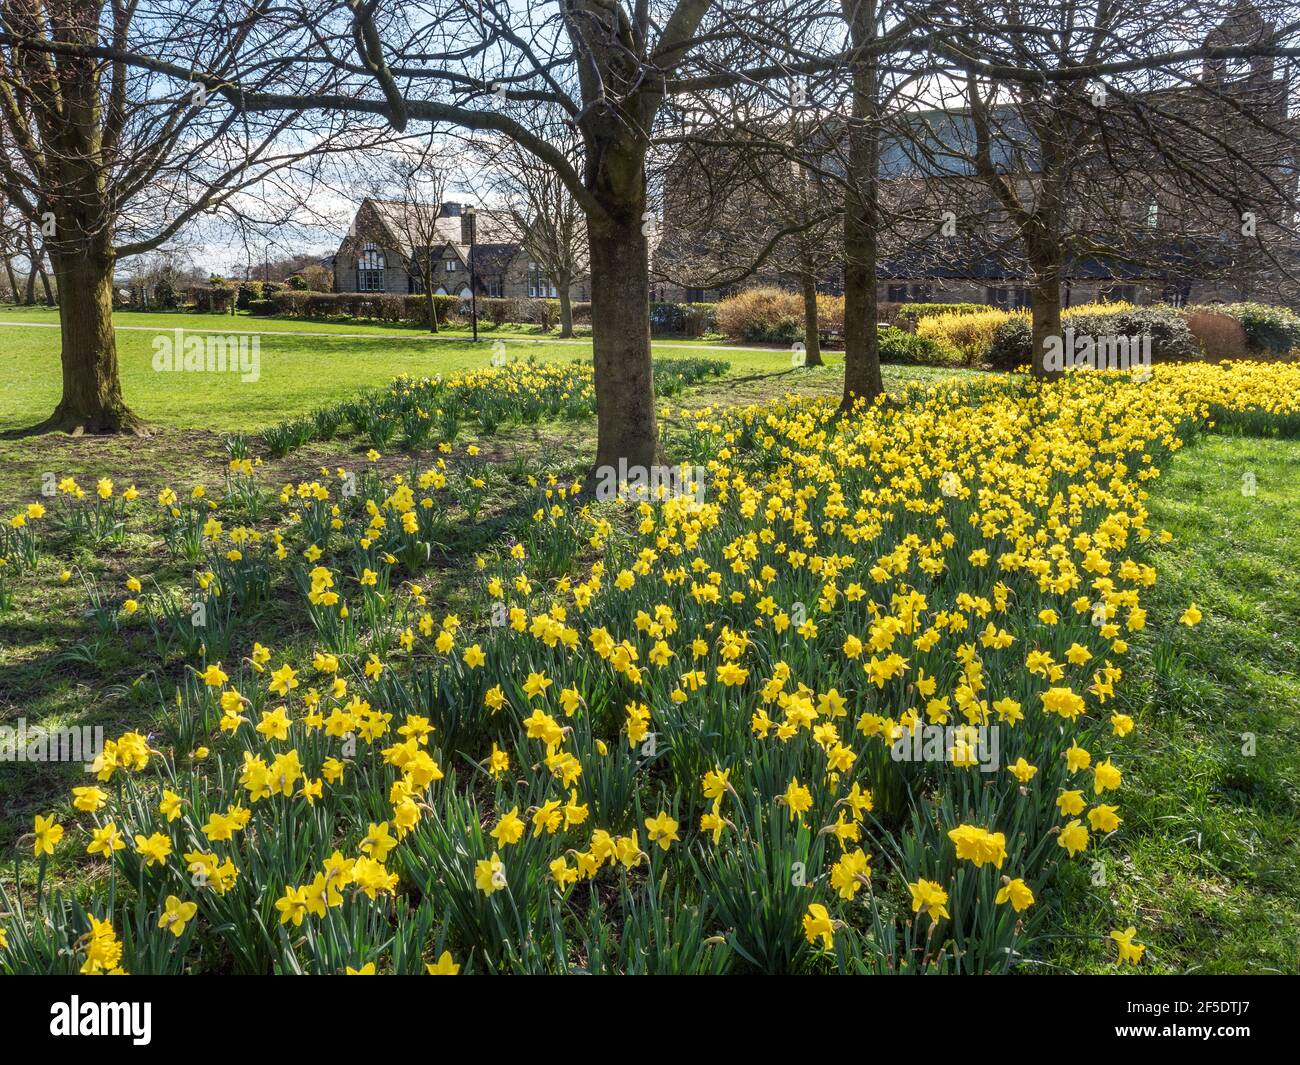 Narcisi in fiore a Belmont Park in Starbeck Harrogate North Yorkshire Inghilterra Foto Stock